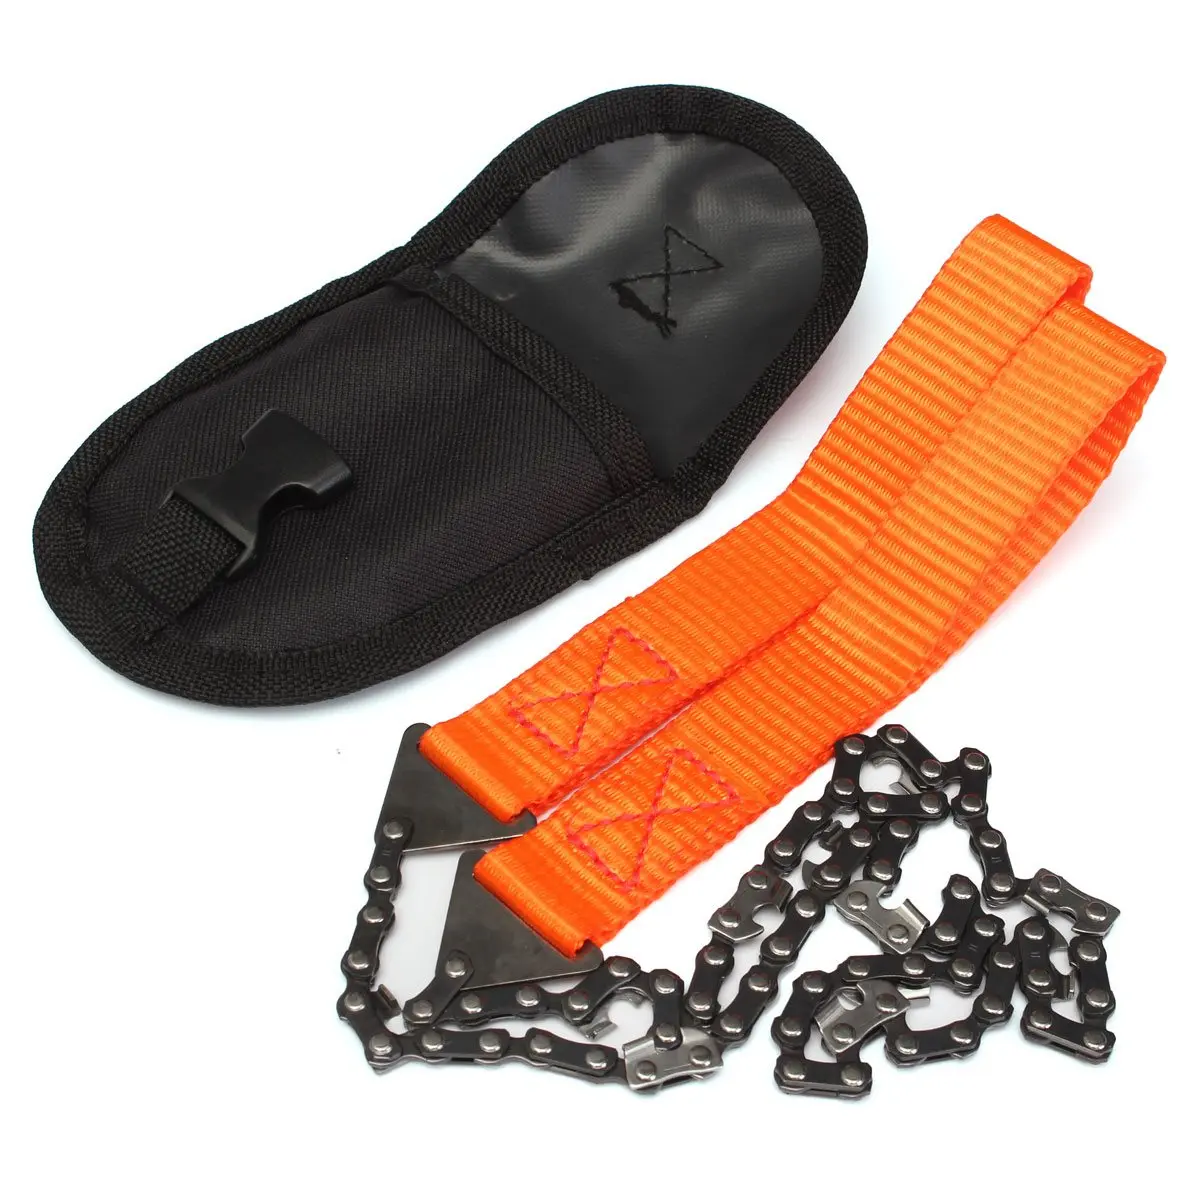 Image 65 manganese steel + nylon thick handle Multifunction Hand Chain Saw Camping Hiking Survival Emergency Tool With Pouch